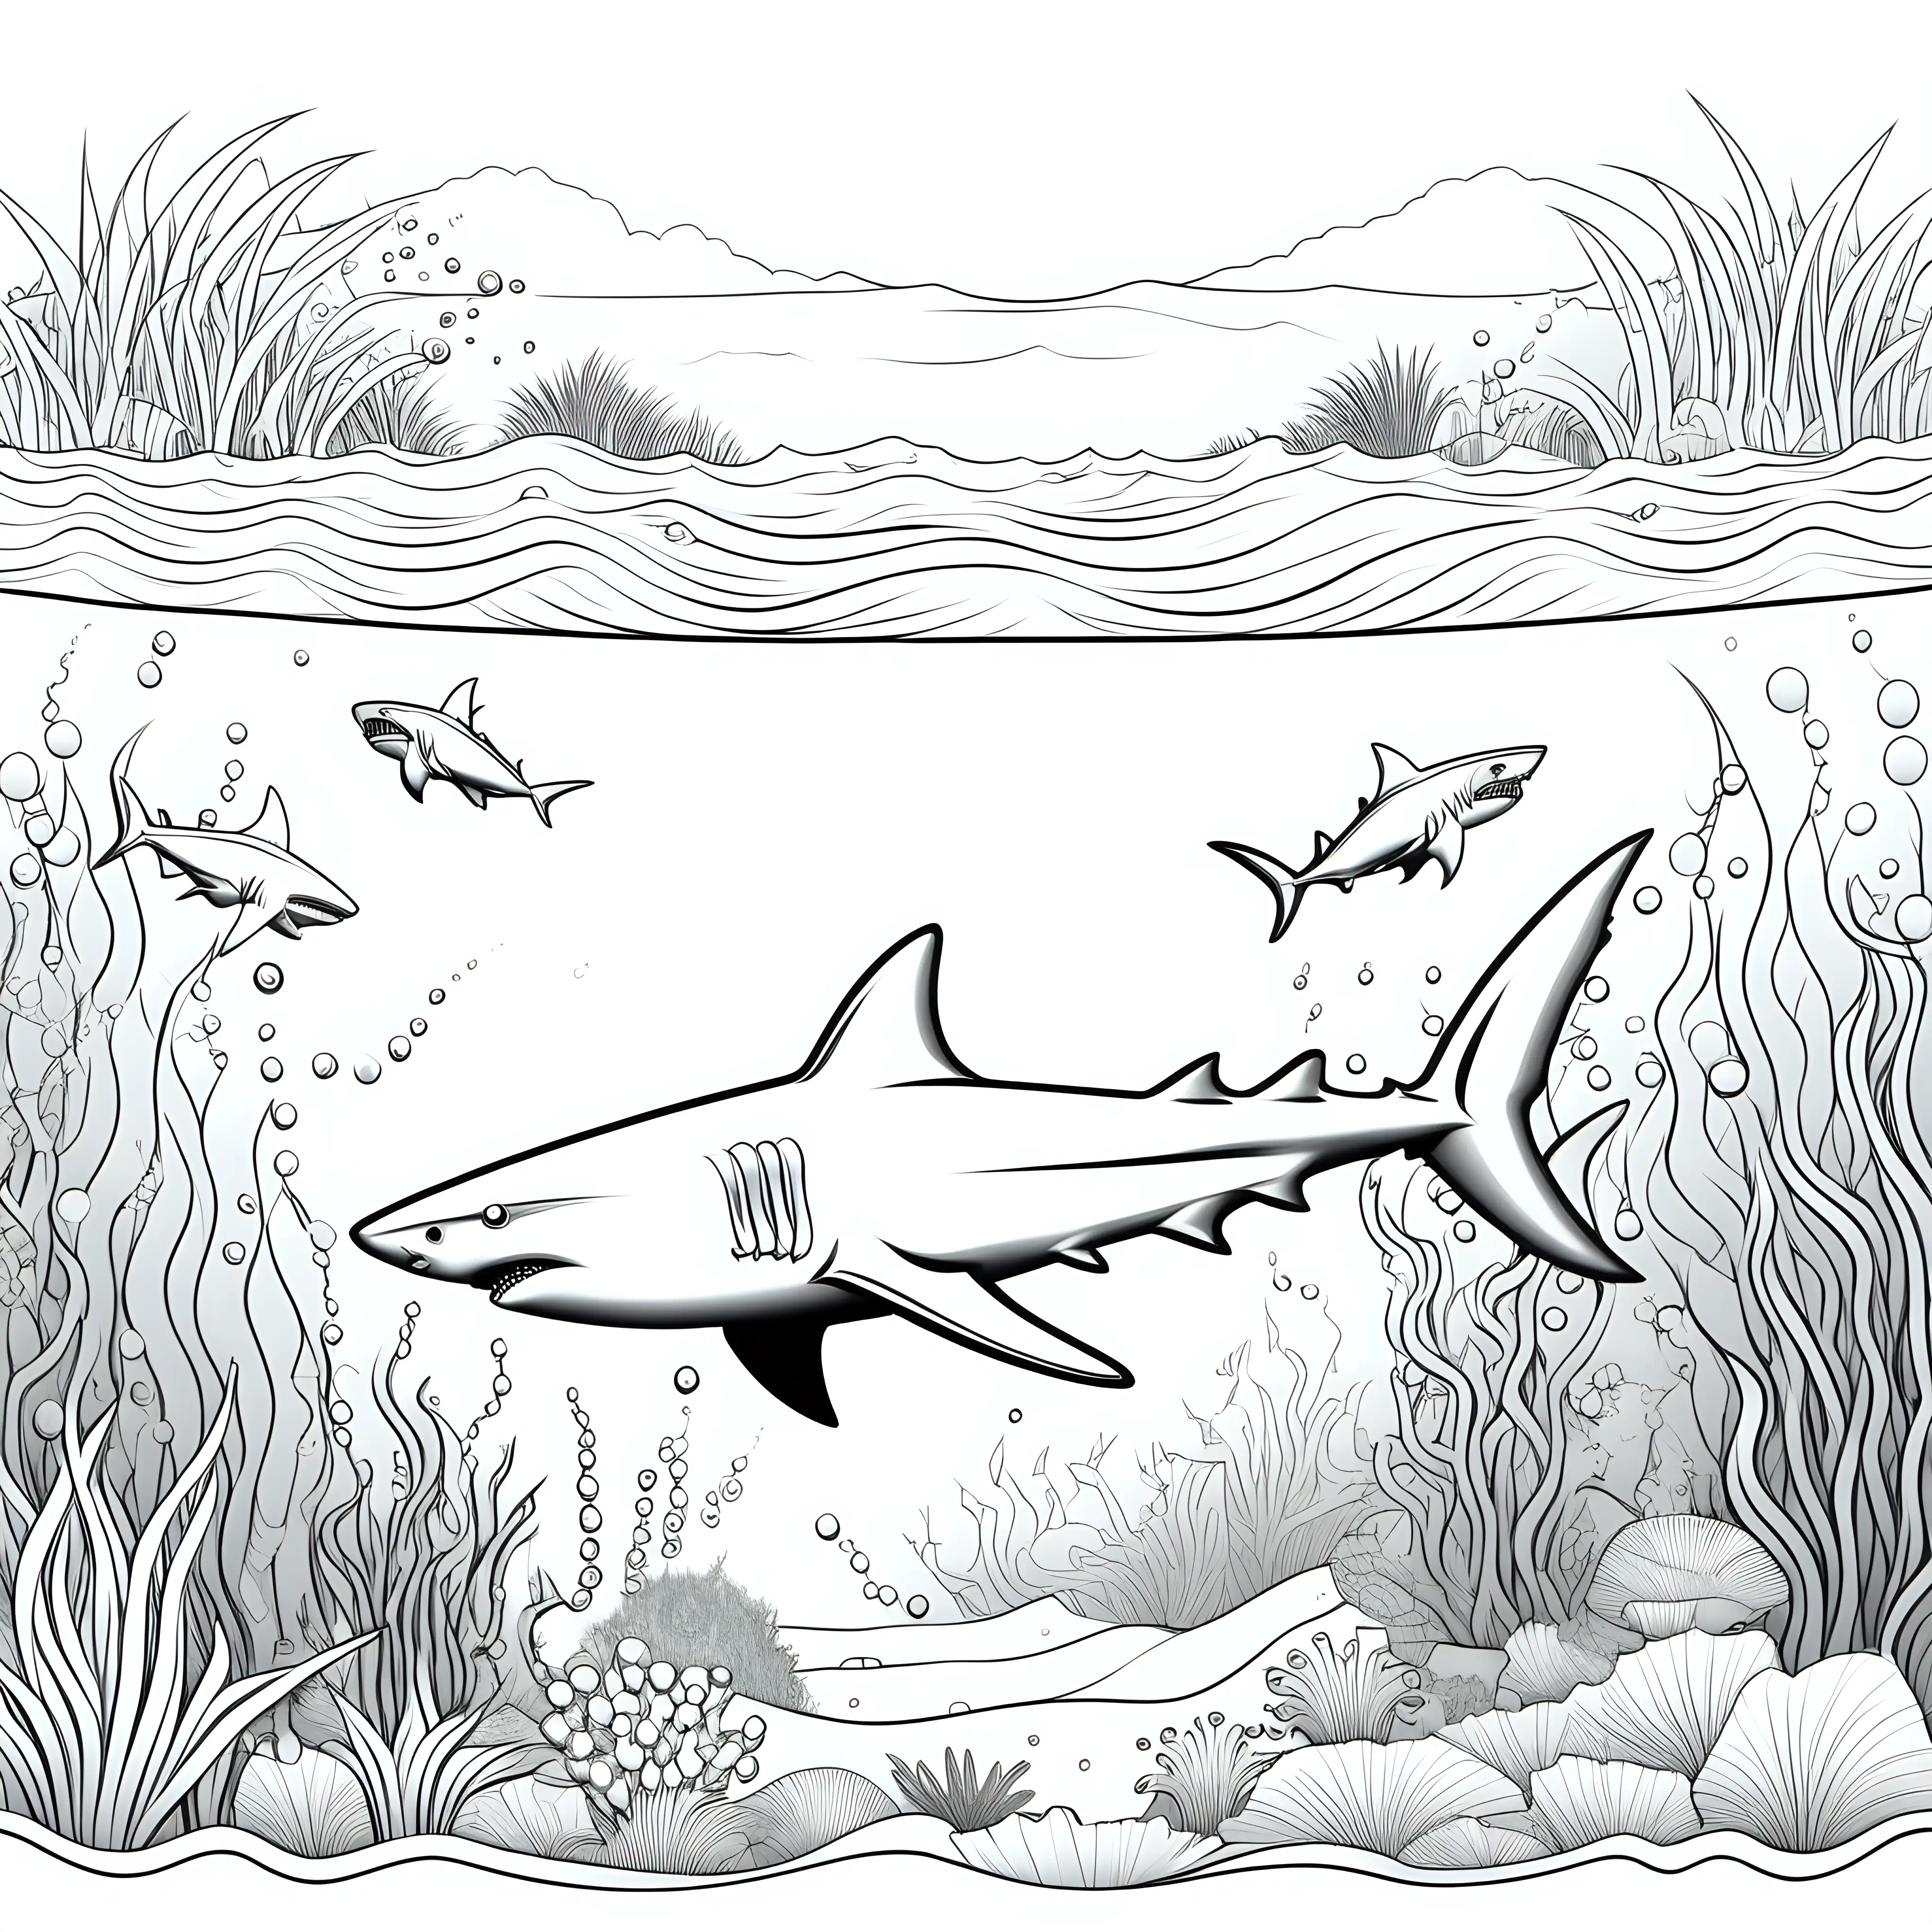 Coloring page for kids, Shark (if considering marine life) in water close to the shore in the Garden of Eden, clean line art